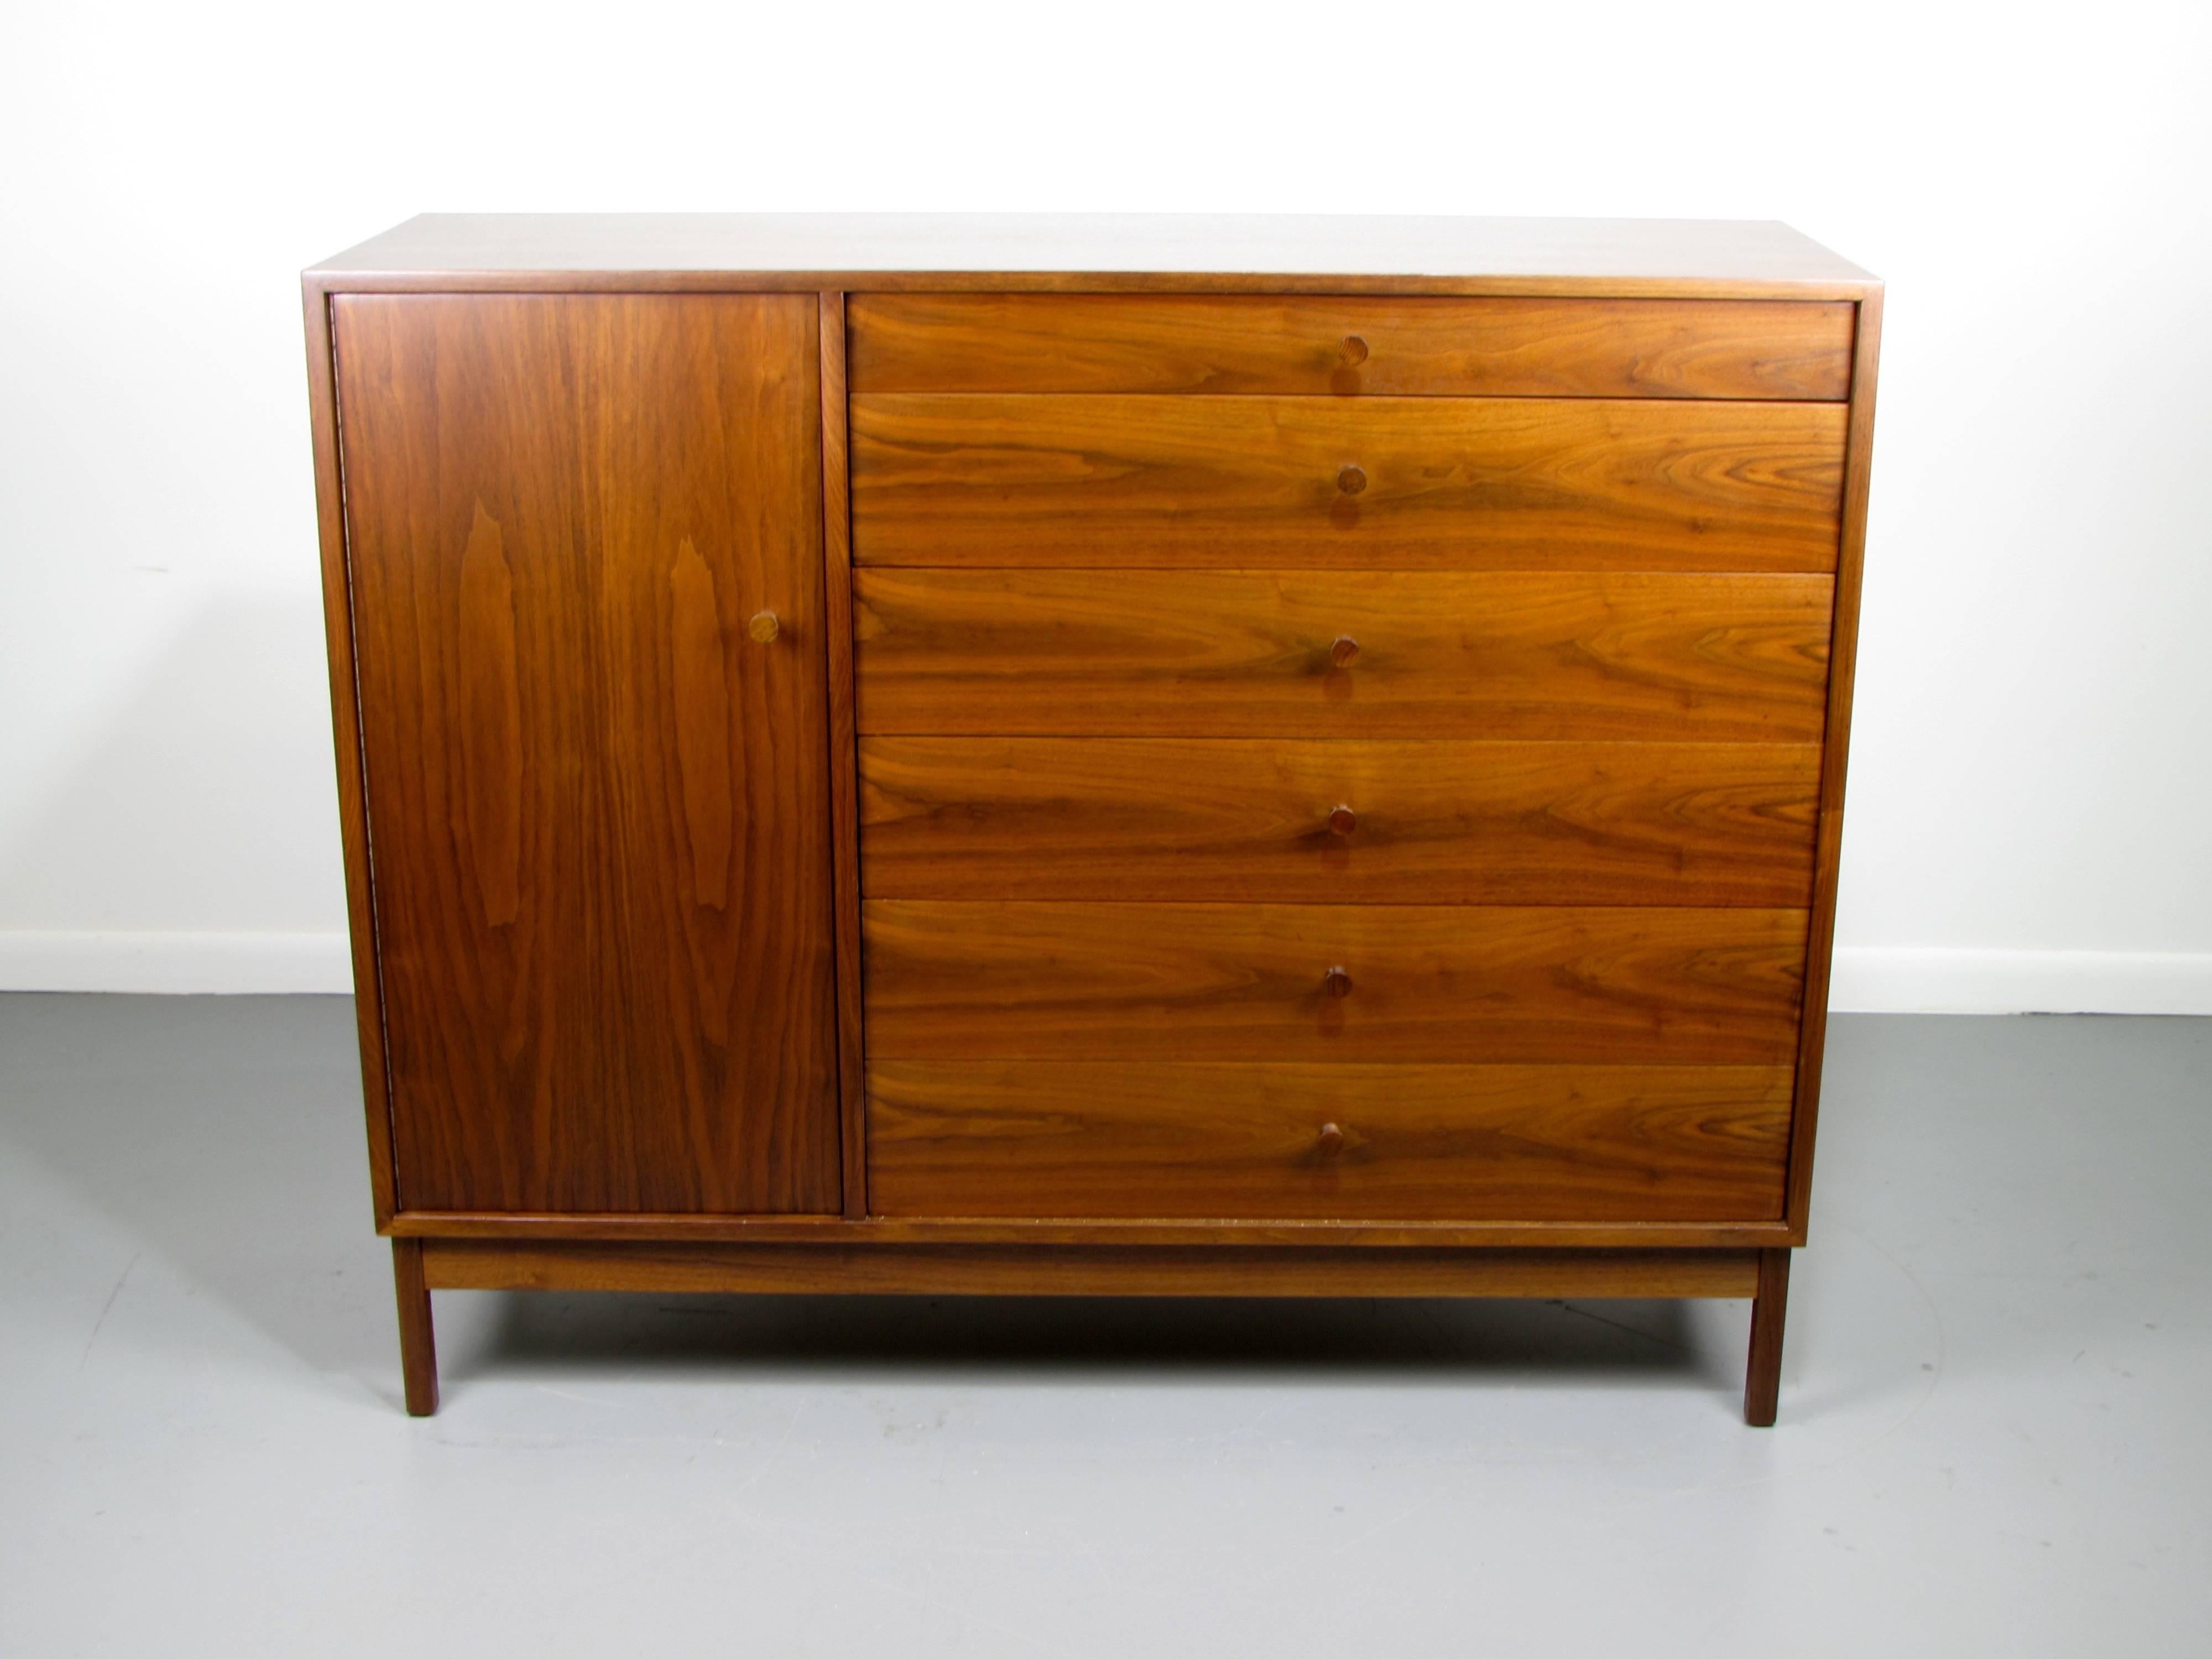 Tall walnut gentlemen's chest dresser by Kipp Stewart for Drexel, 1950s. Fully restored and in excellent condition. 

We offer free regular deliveries to NYC and Philadelphia area. Delivery to DC, MD, CT and MA are available if schedule permits,